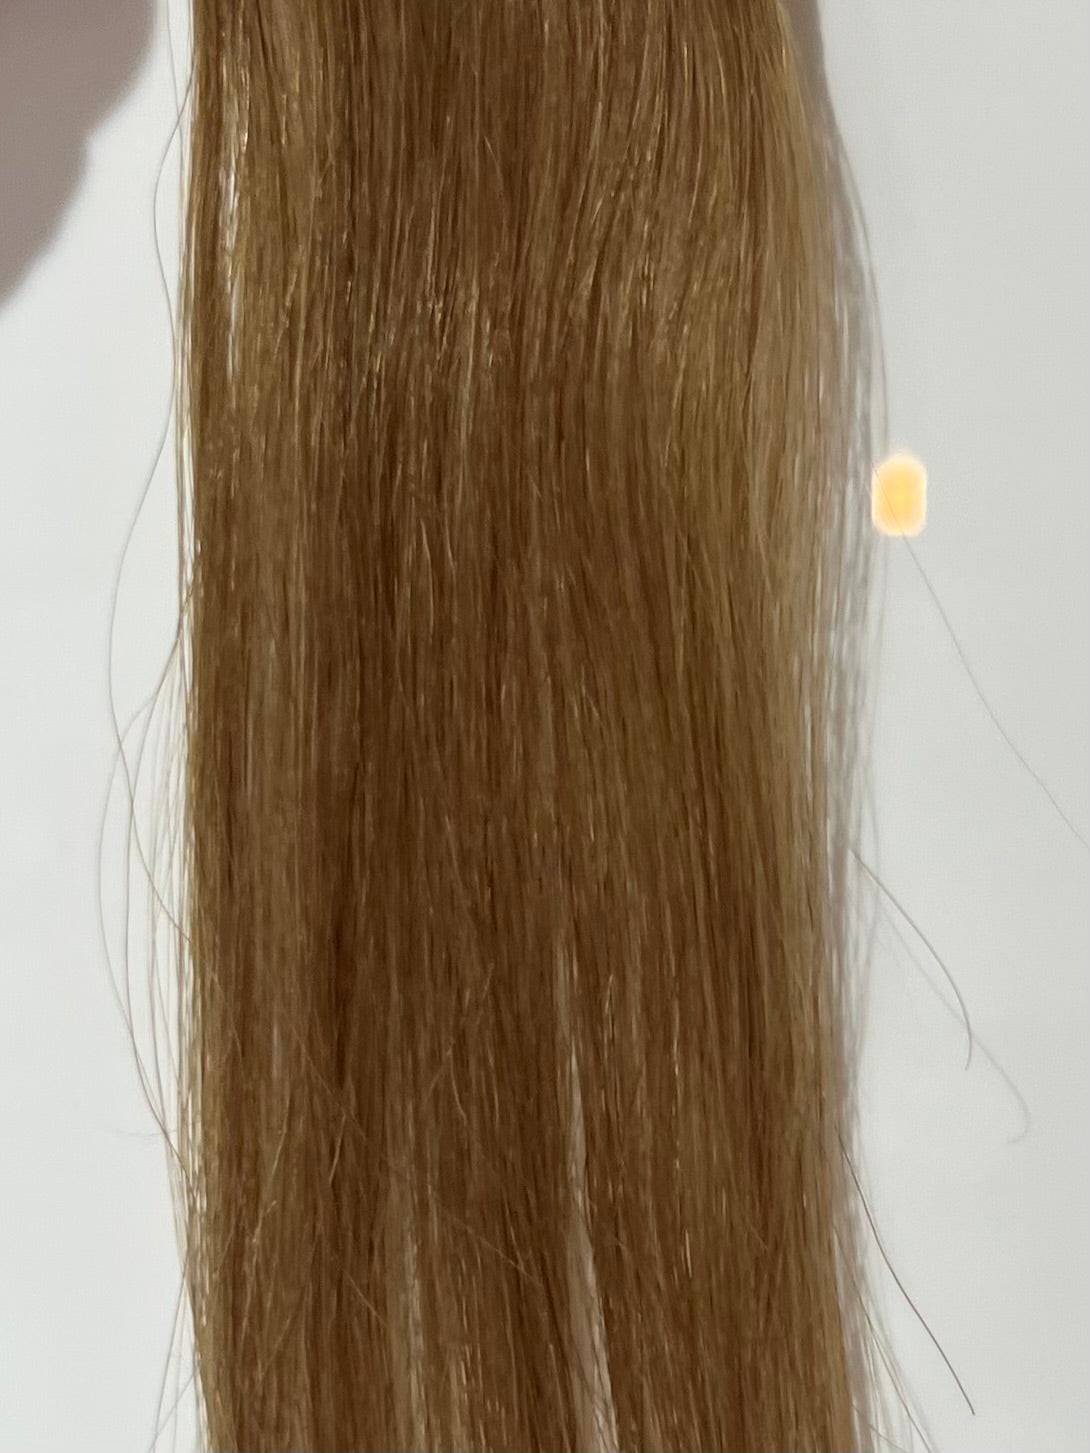 RETAIL CLIP IN EXTENSIONS - LIGHT WARM BROWN